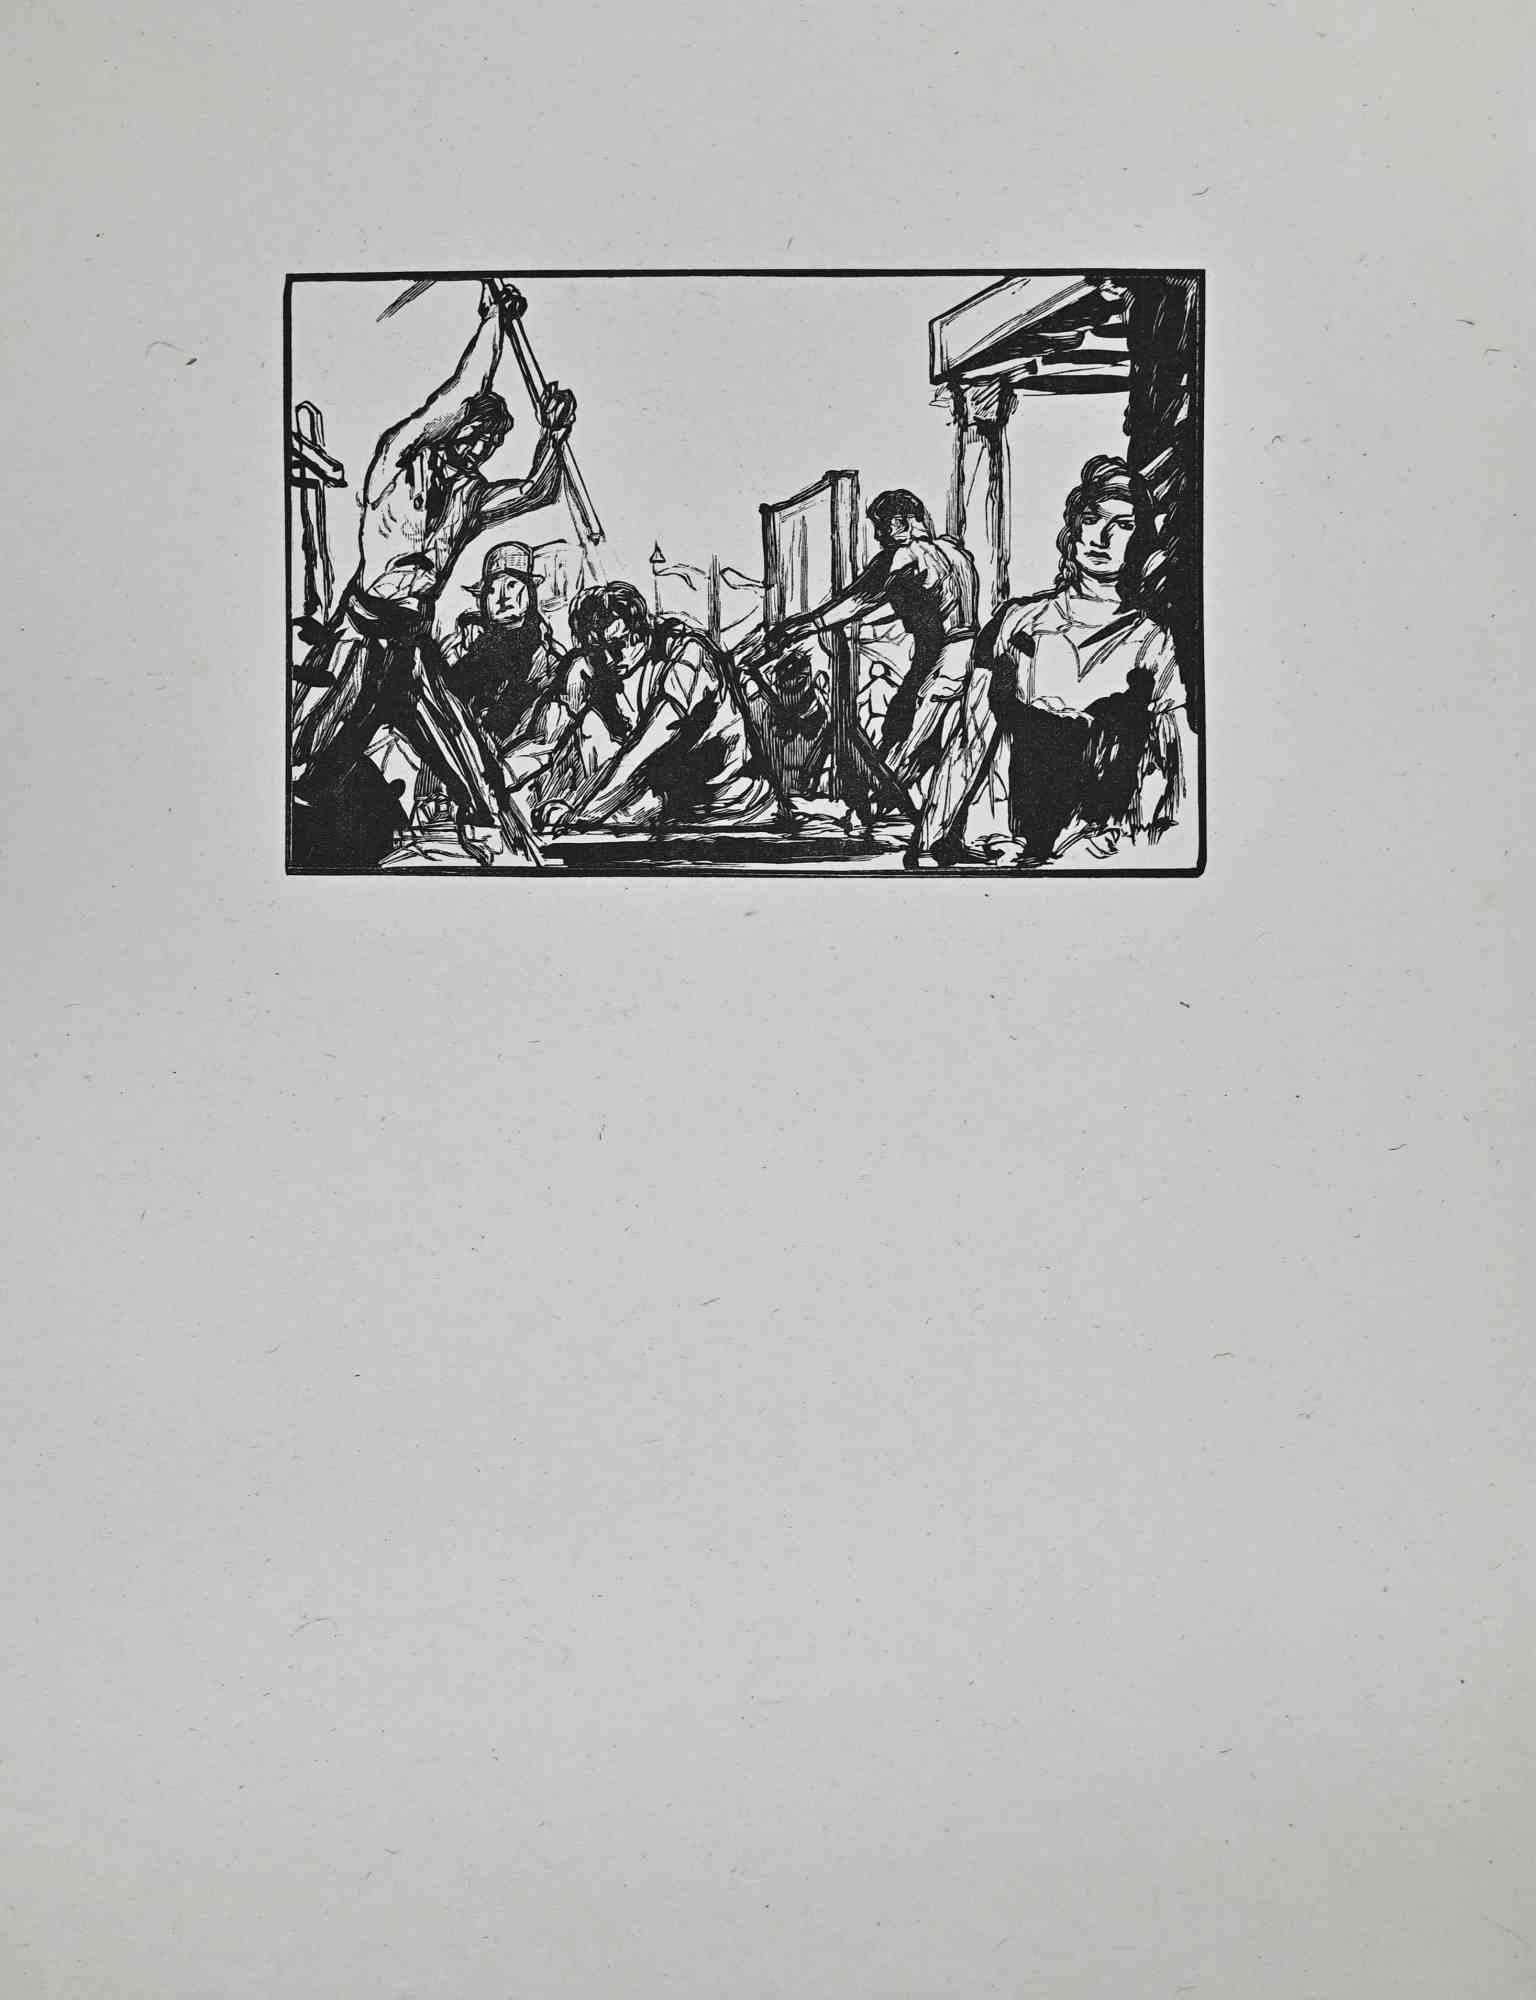 The Torture and Execution - Original Woodcut print by Paul Baudier - 1930s